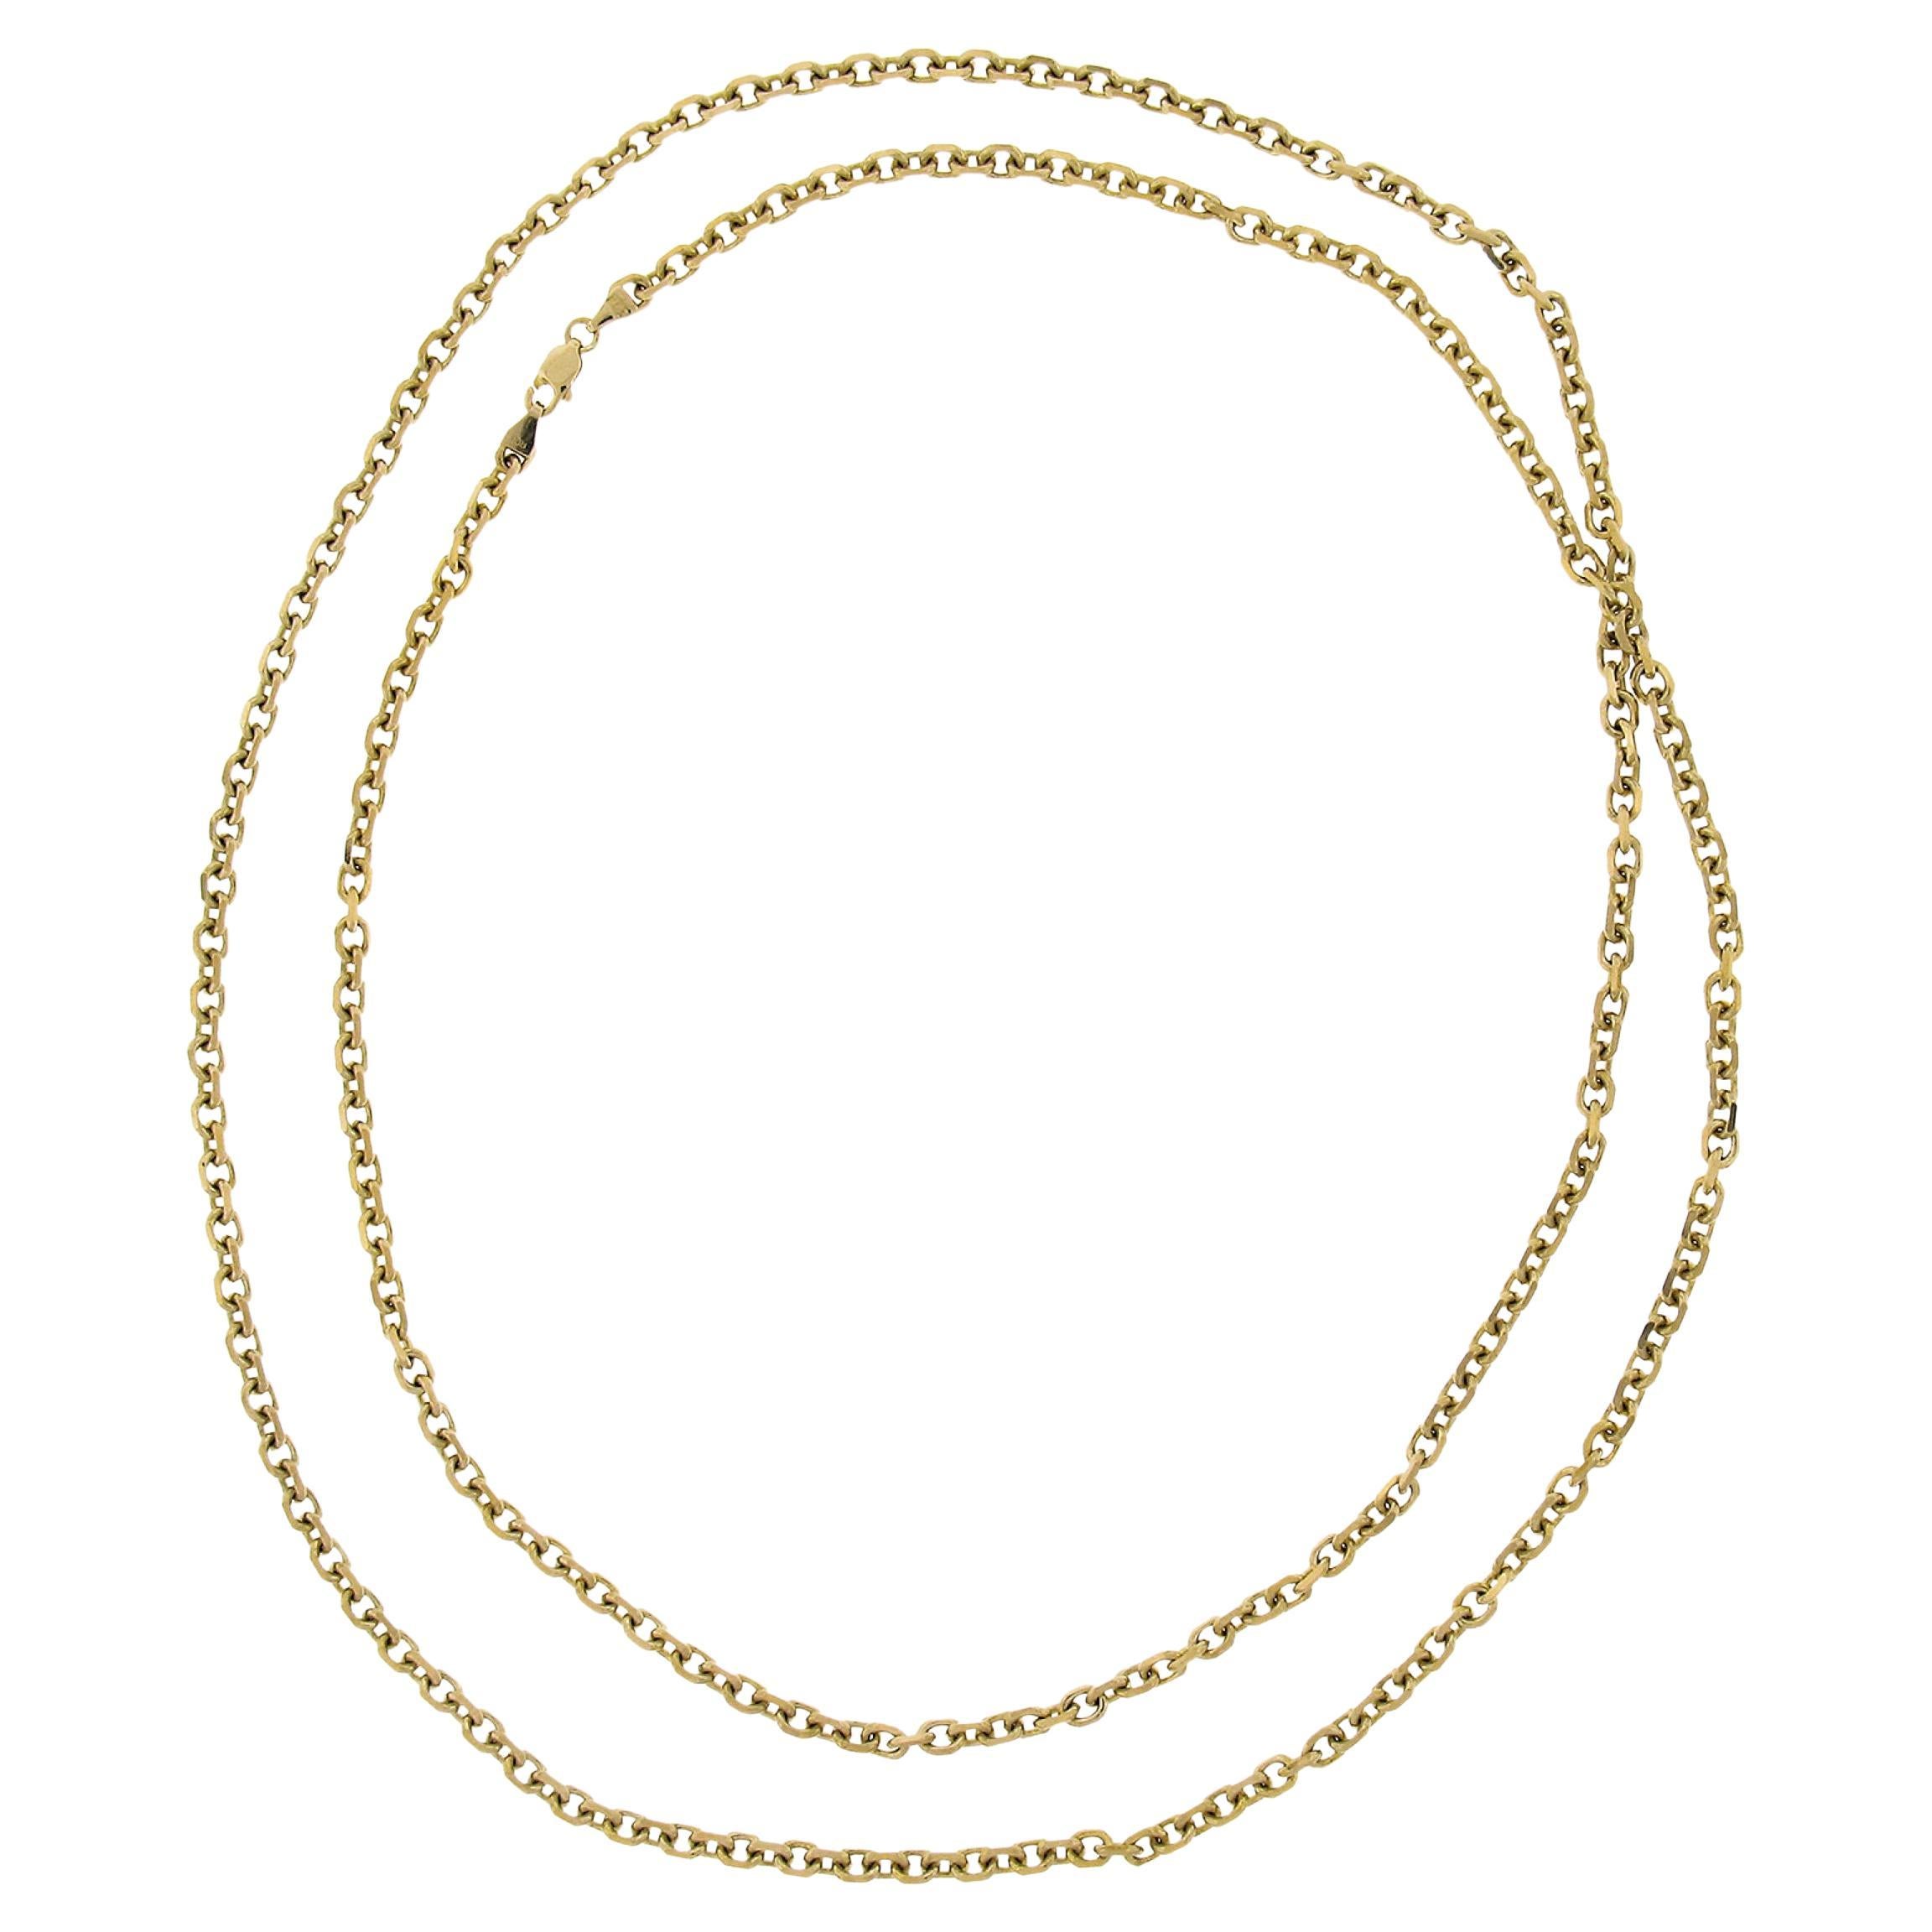 Solid 14K Yellow Gold Long 36" Beveled Cable Link Chain Necklace